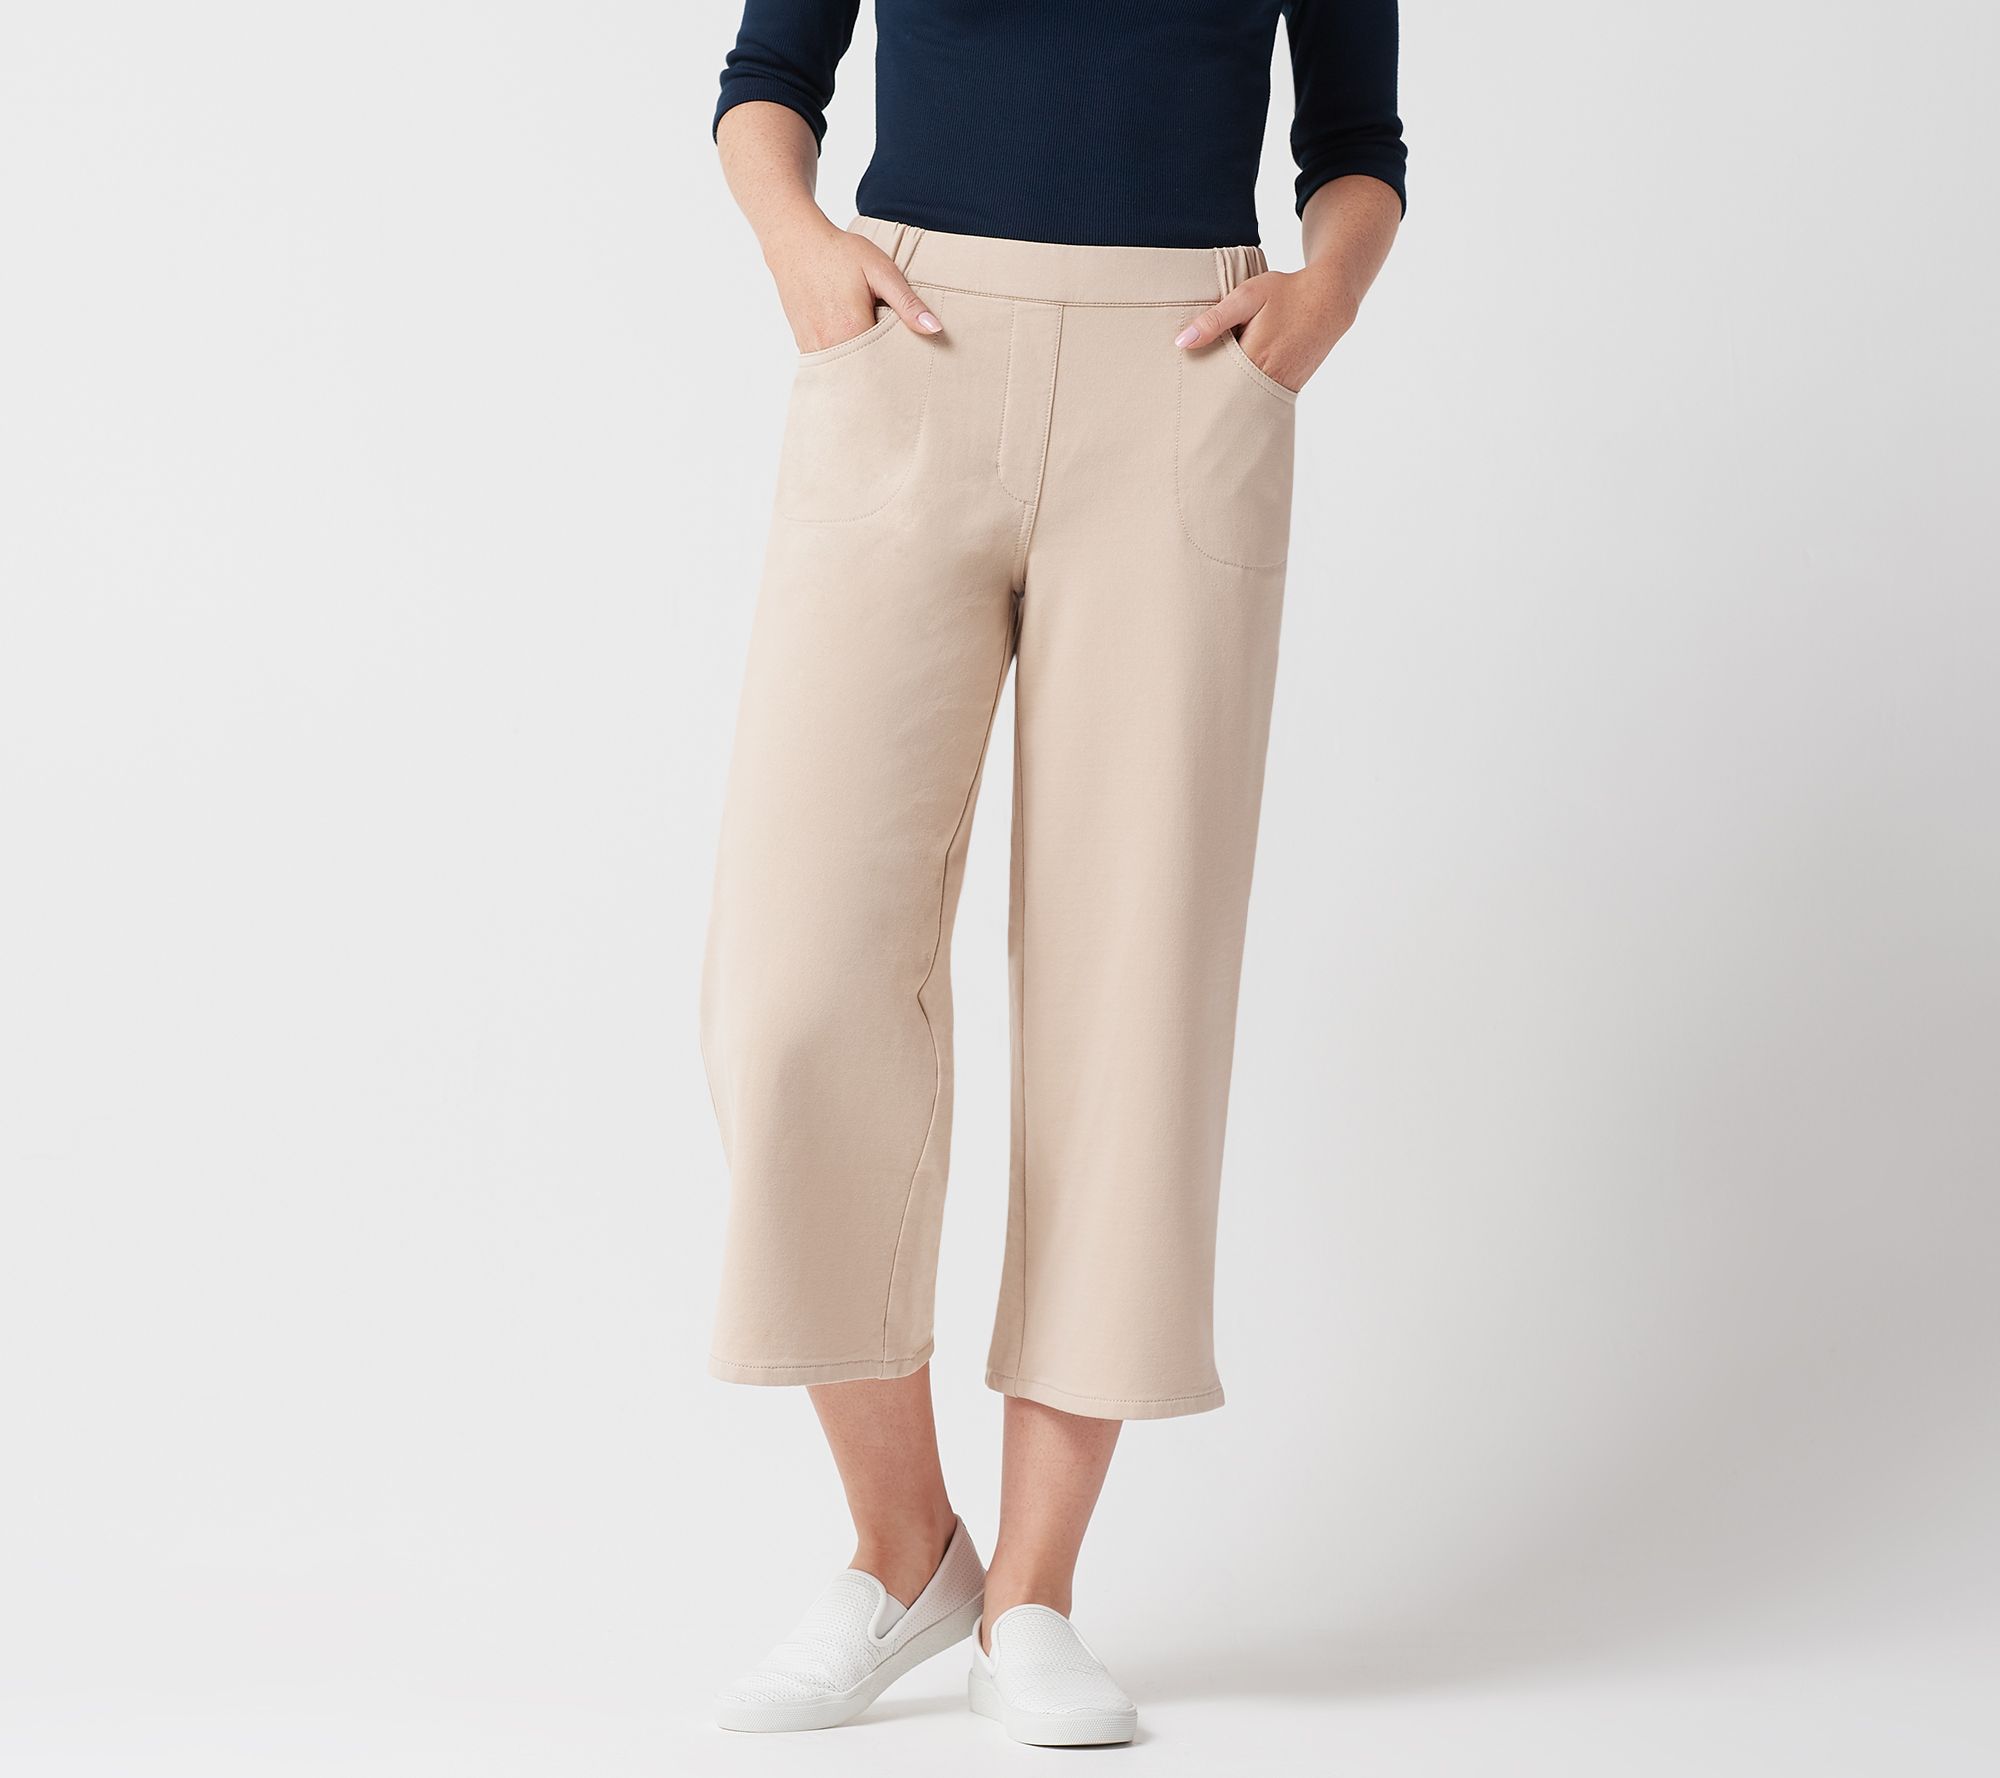 Culotte Pants Are What Your Wardrobe Is Starving For This Summer